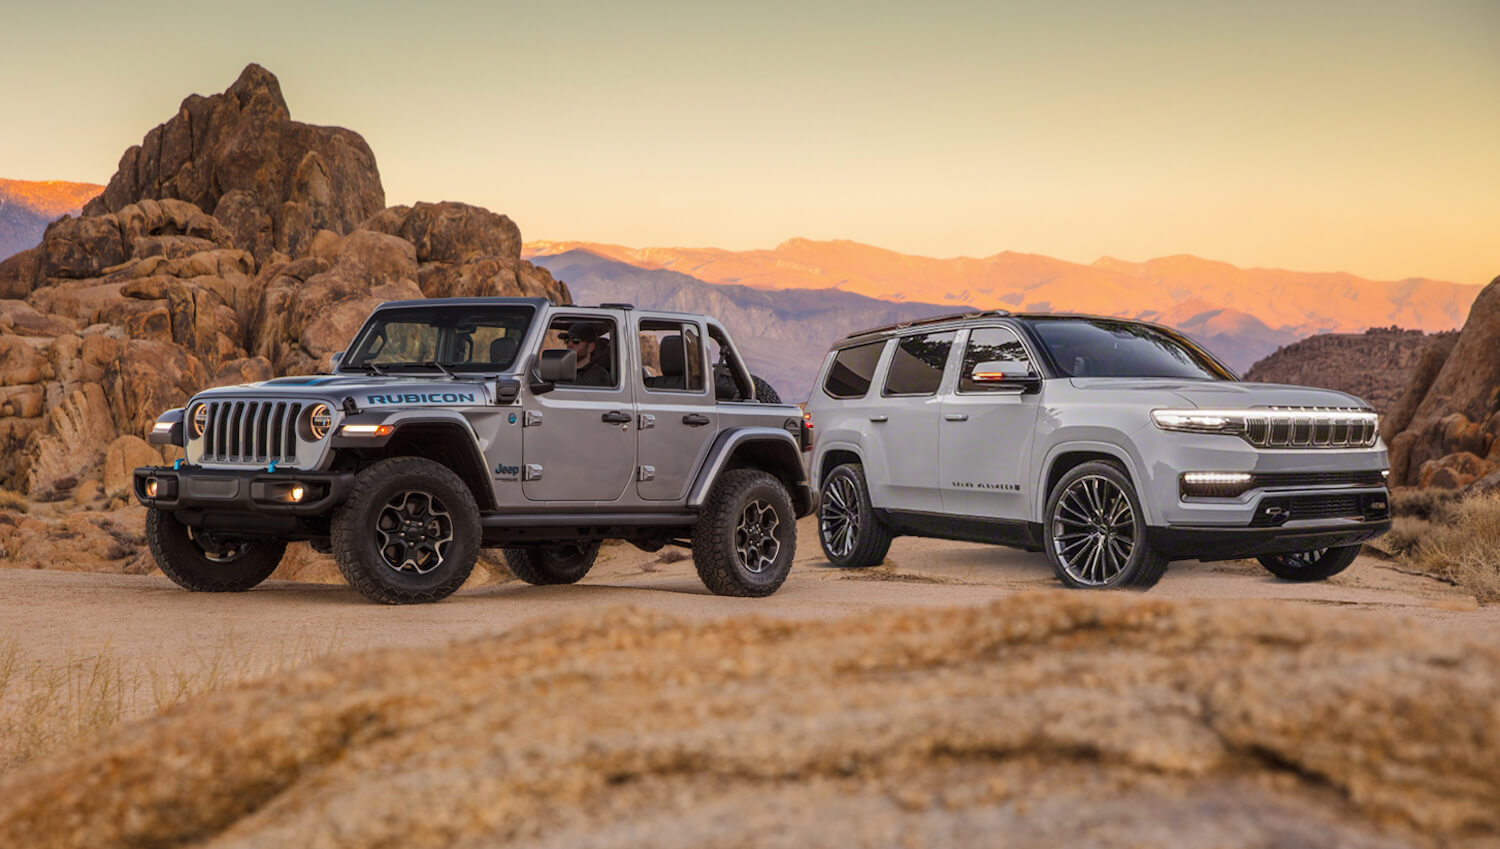 01 2021 Jeep Grand Wagoneer Concept and 2021 Jeep Wrangler 4xe